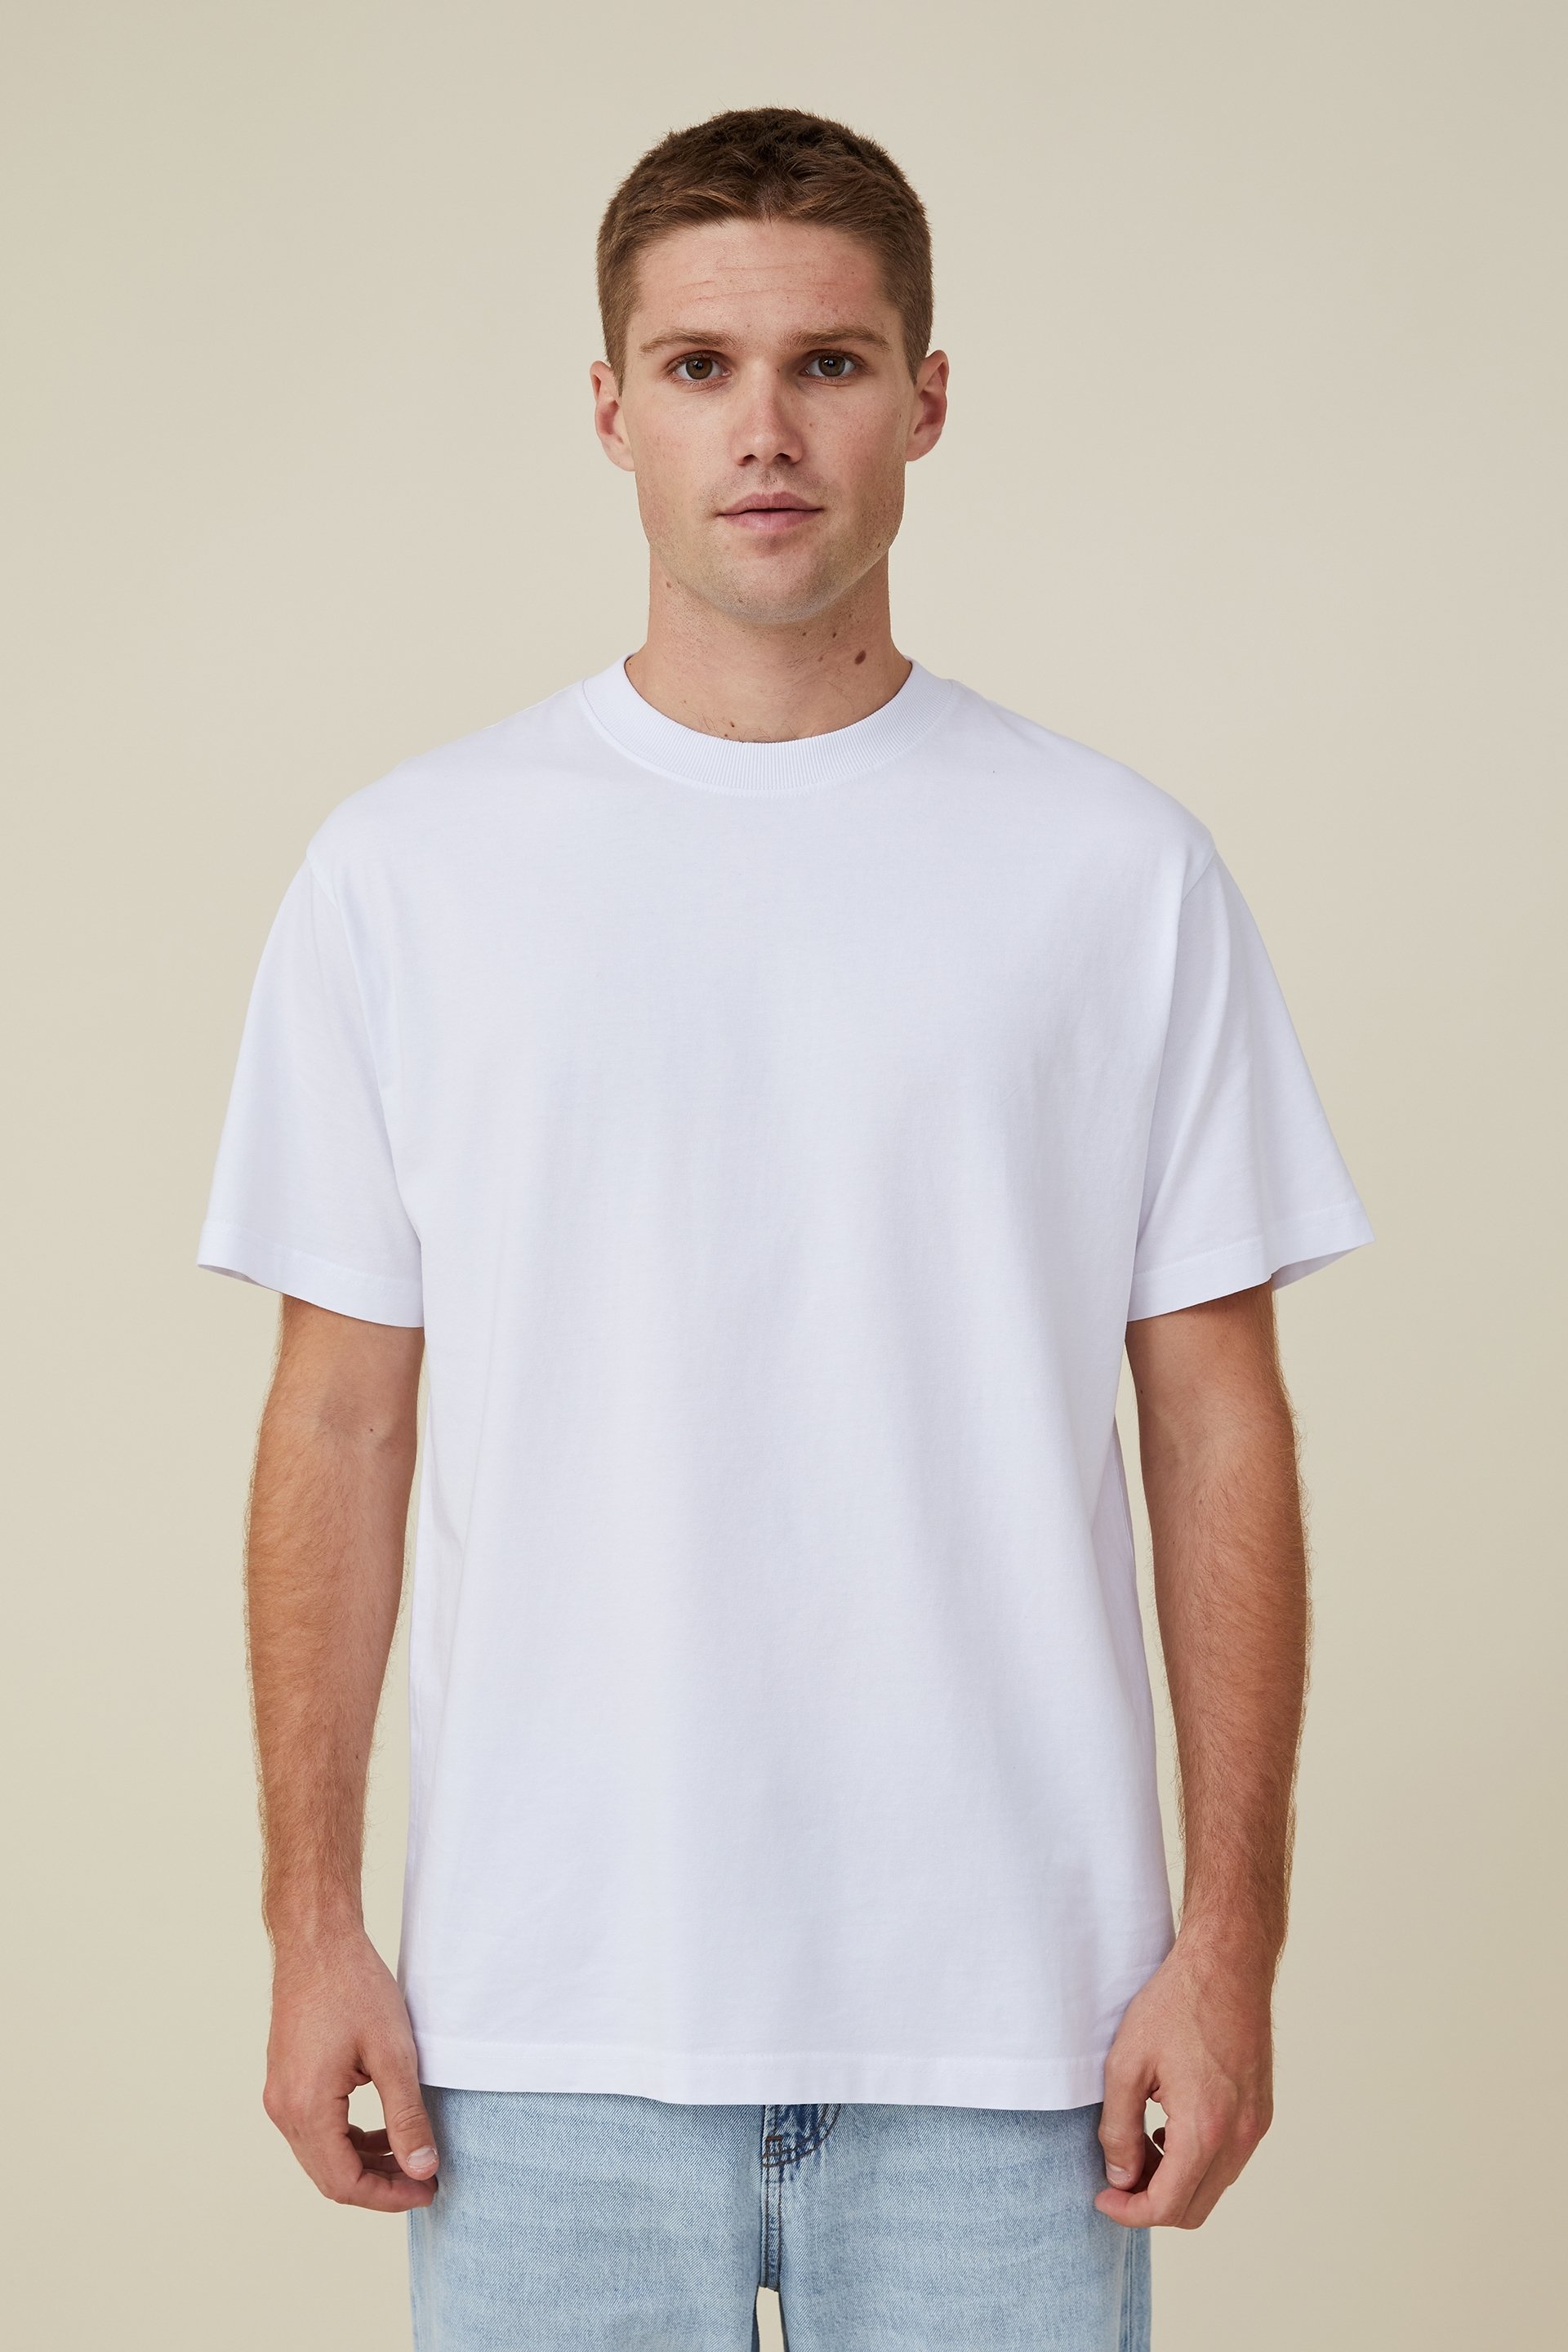 Baggy Versus Fitted t shirts: The Pros & Cons of Each